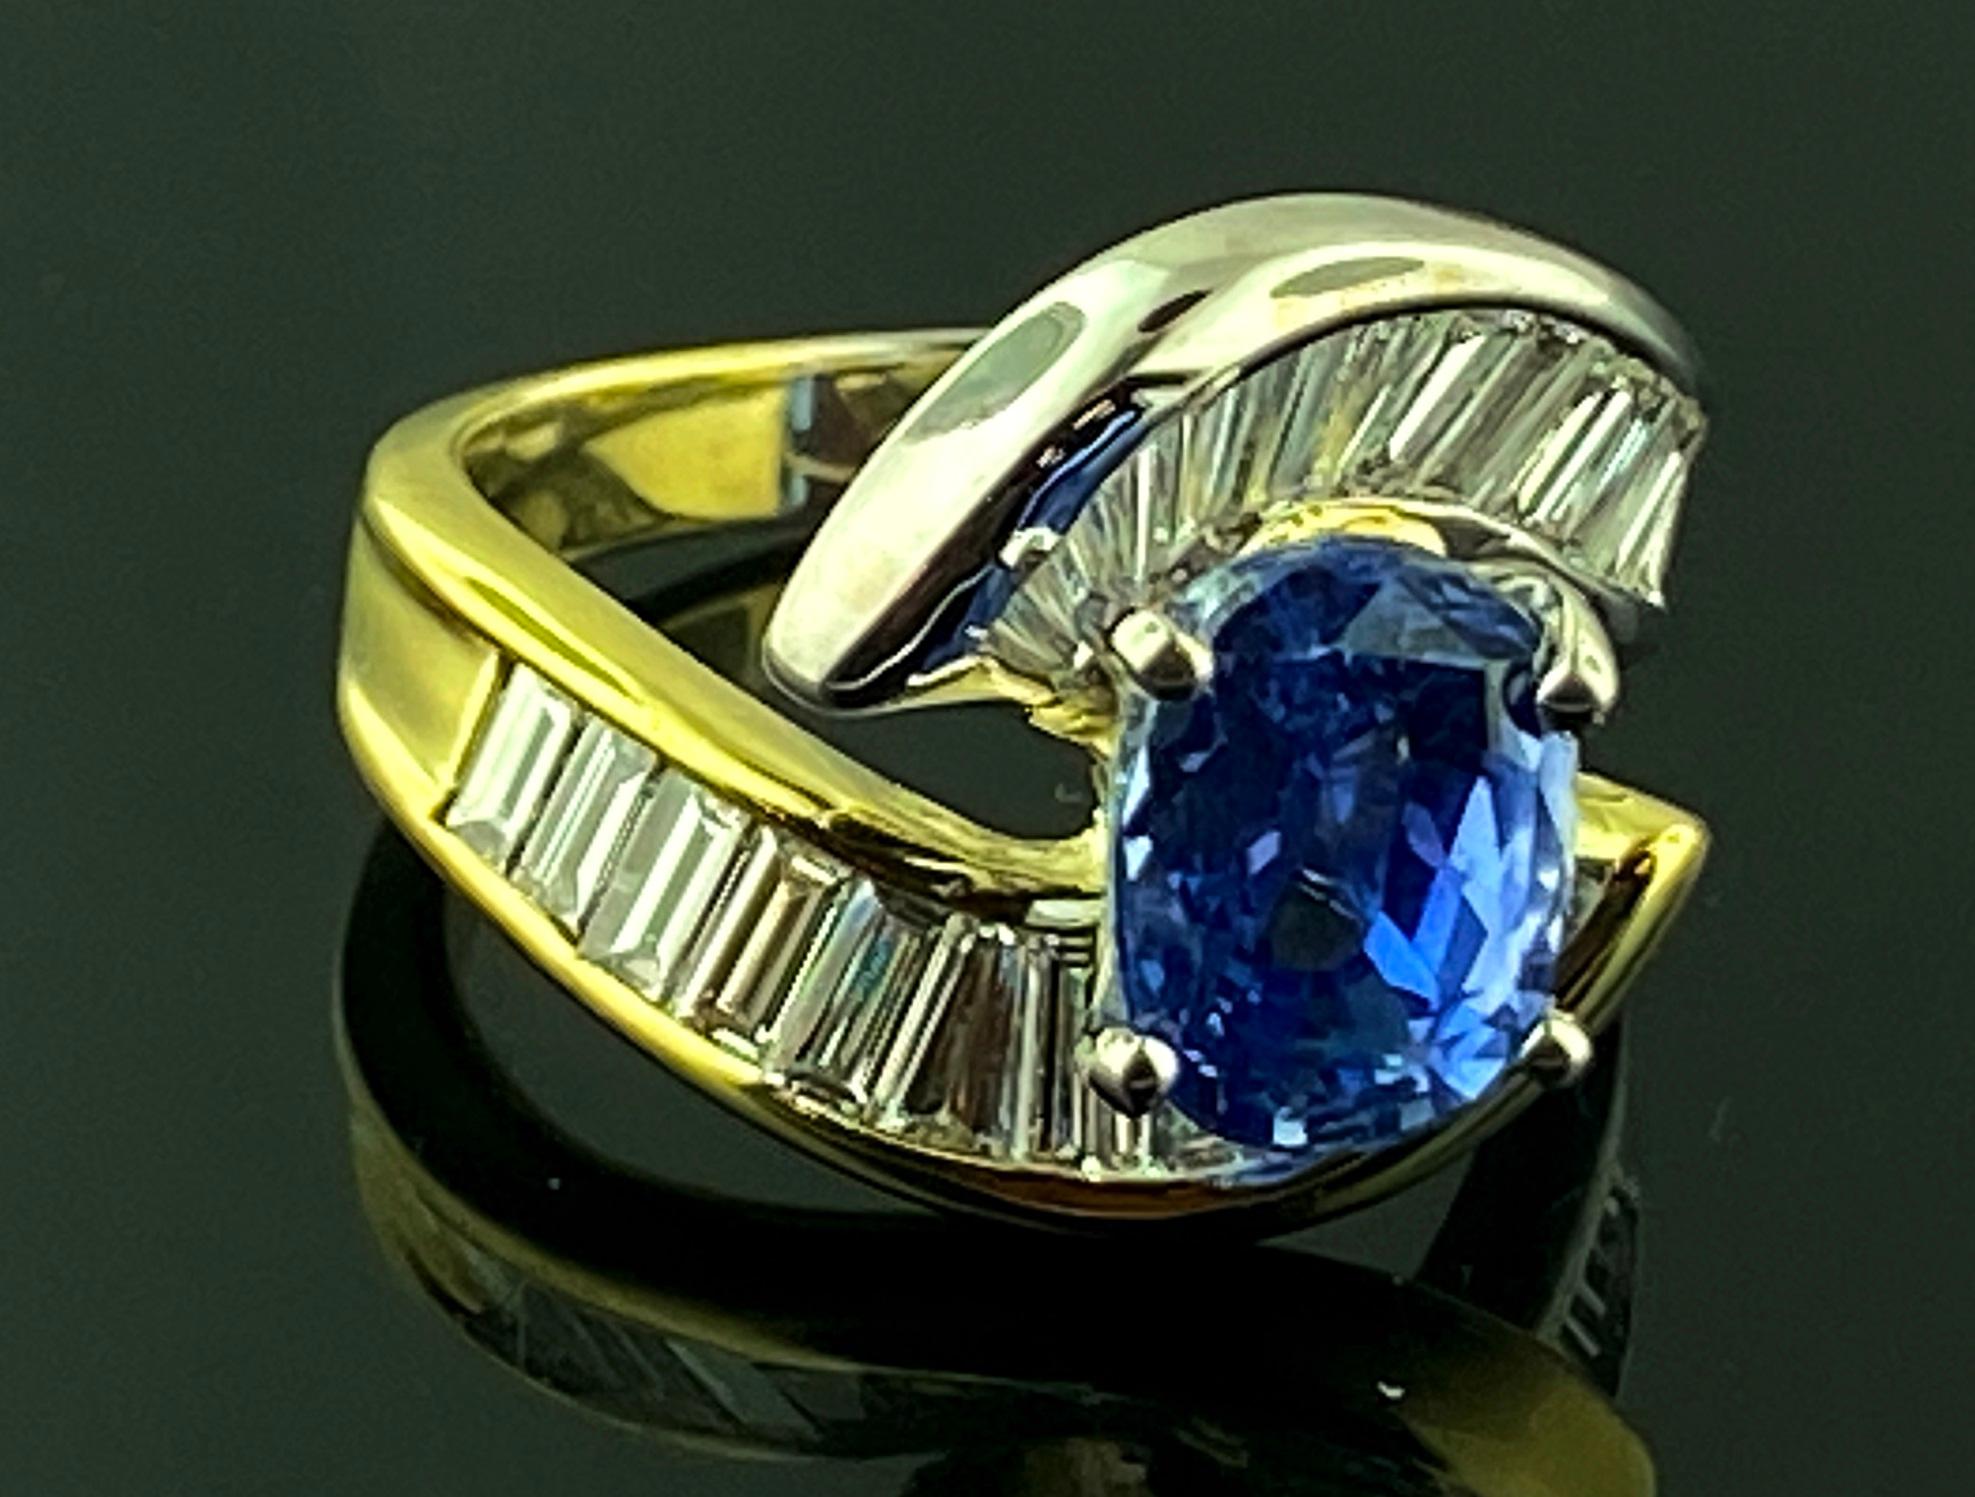 18 KT White & Yellow Gold Ring with a 4.03 Ct Blue Sapphire and 2.0 Cts Diamonds 2